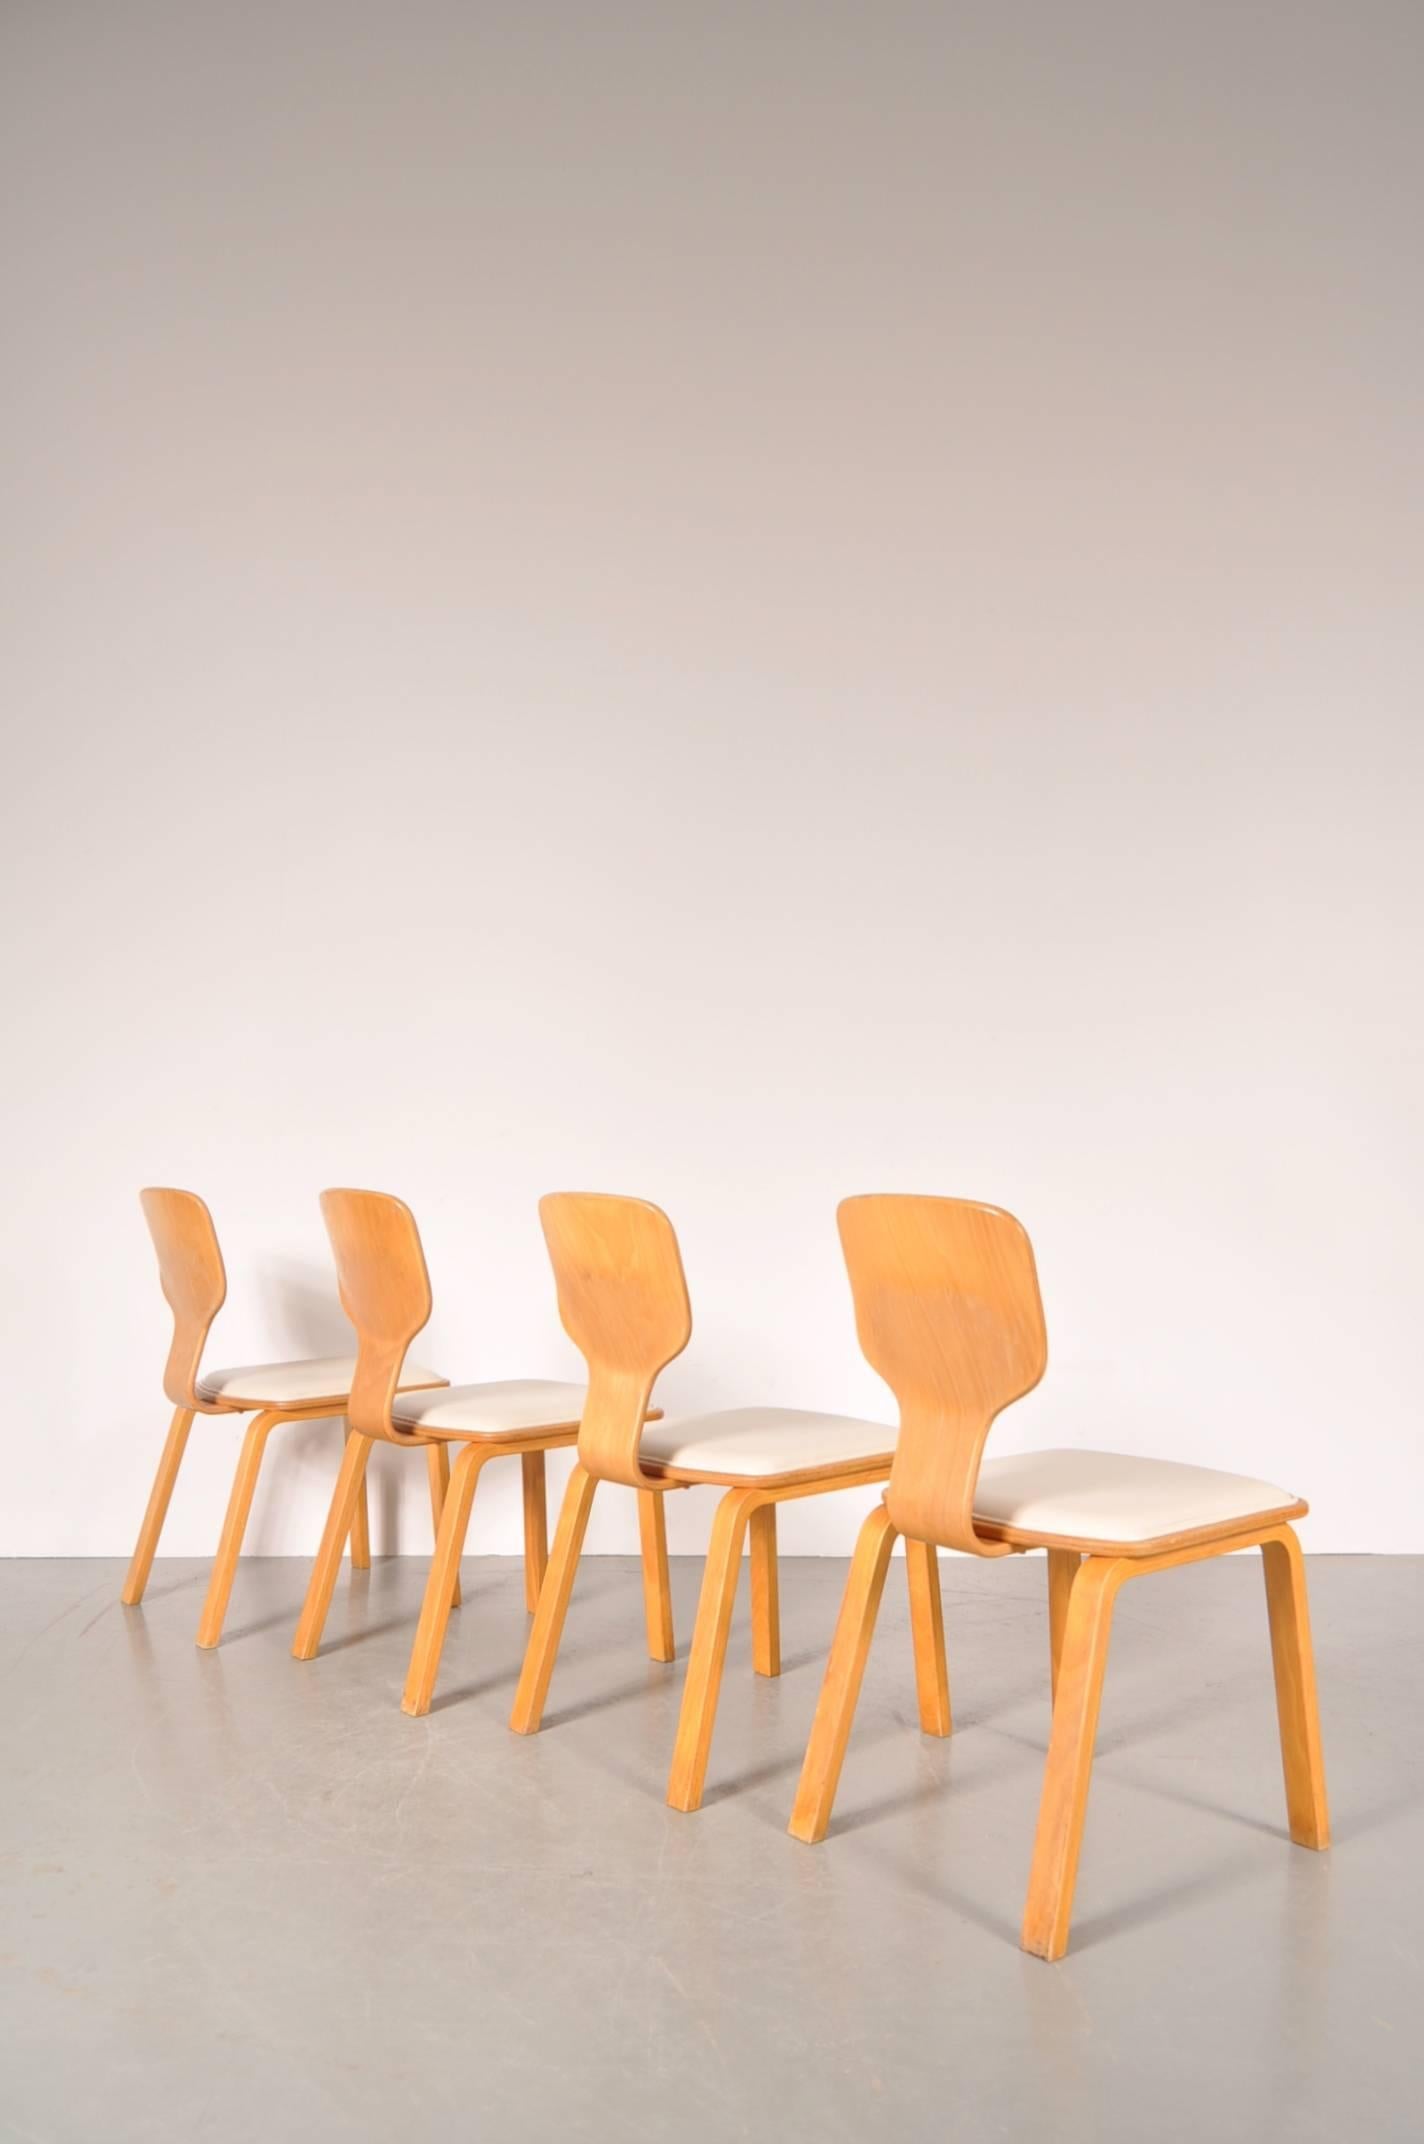 Iconic set of four dining chairs, model T-0635B, designed by Katsuo Matsumura, manufactured by Tendo in Japan in 1982.

Matsumura created this chair passionately hoping it would become a design that wasn’t influenced by fads. He wanted to design a